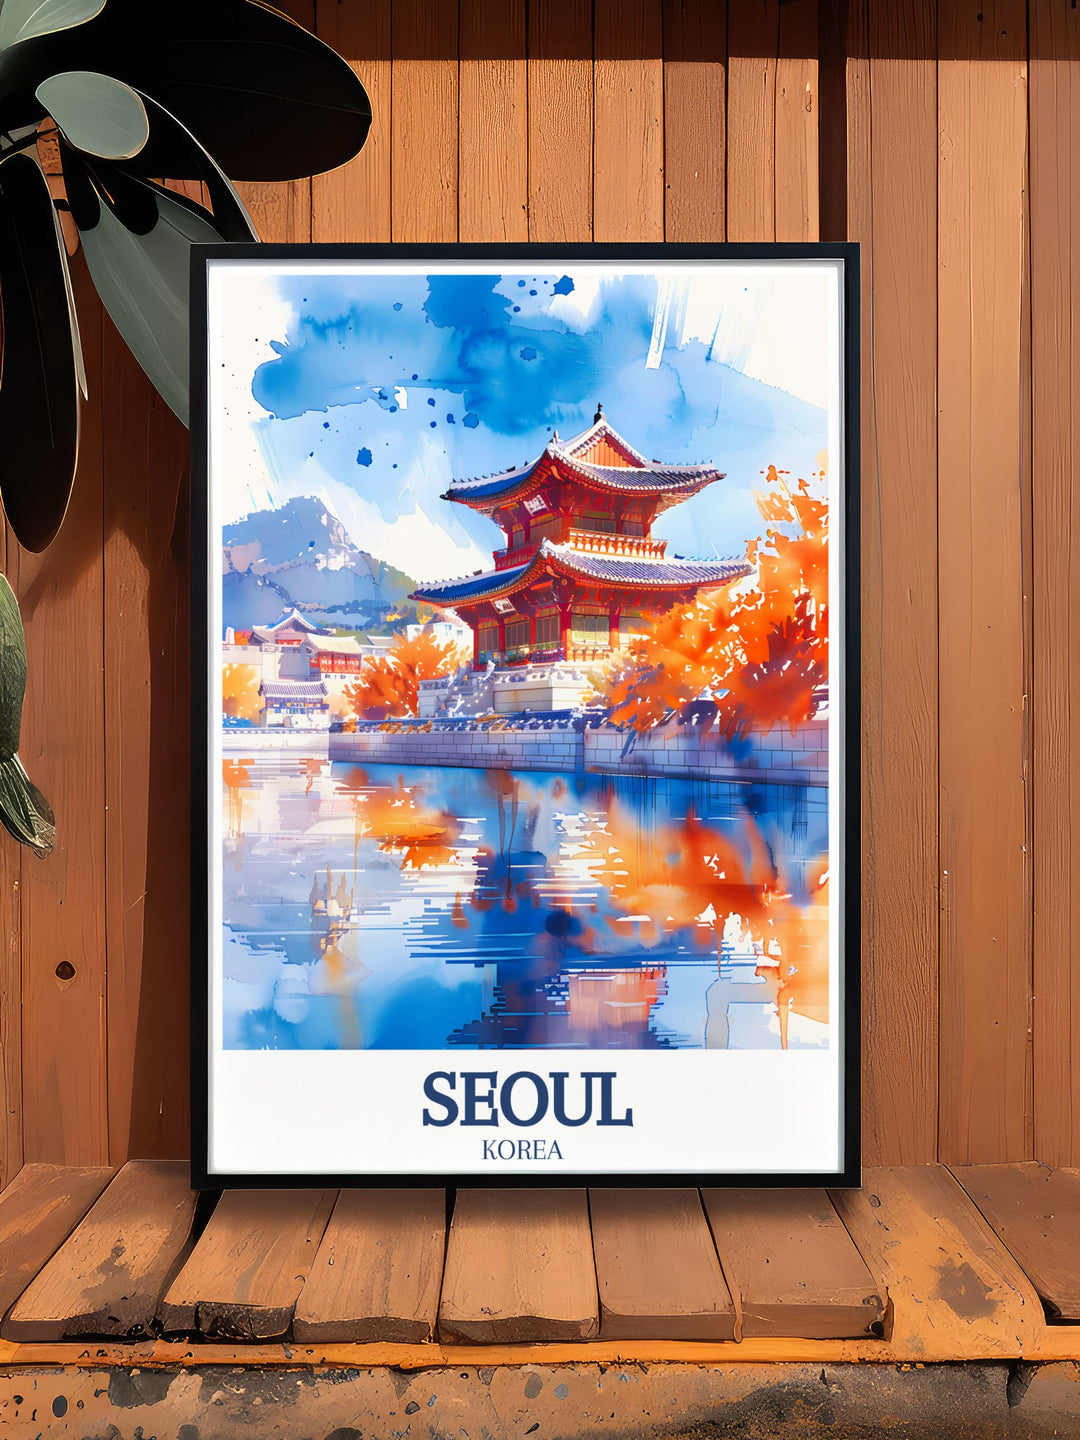 Elegant Seoul Wall Art featuring Gyeongbokgung Palace and Han River capturing the essence of Seouls vibrant city life and serene landscapes perfect for home decor and thoughtful gifts for any occasion